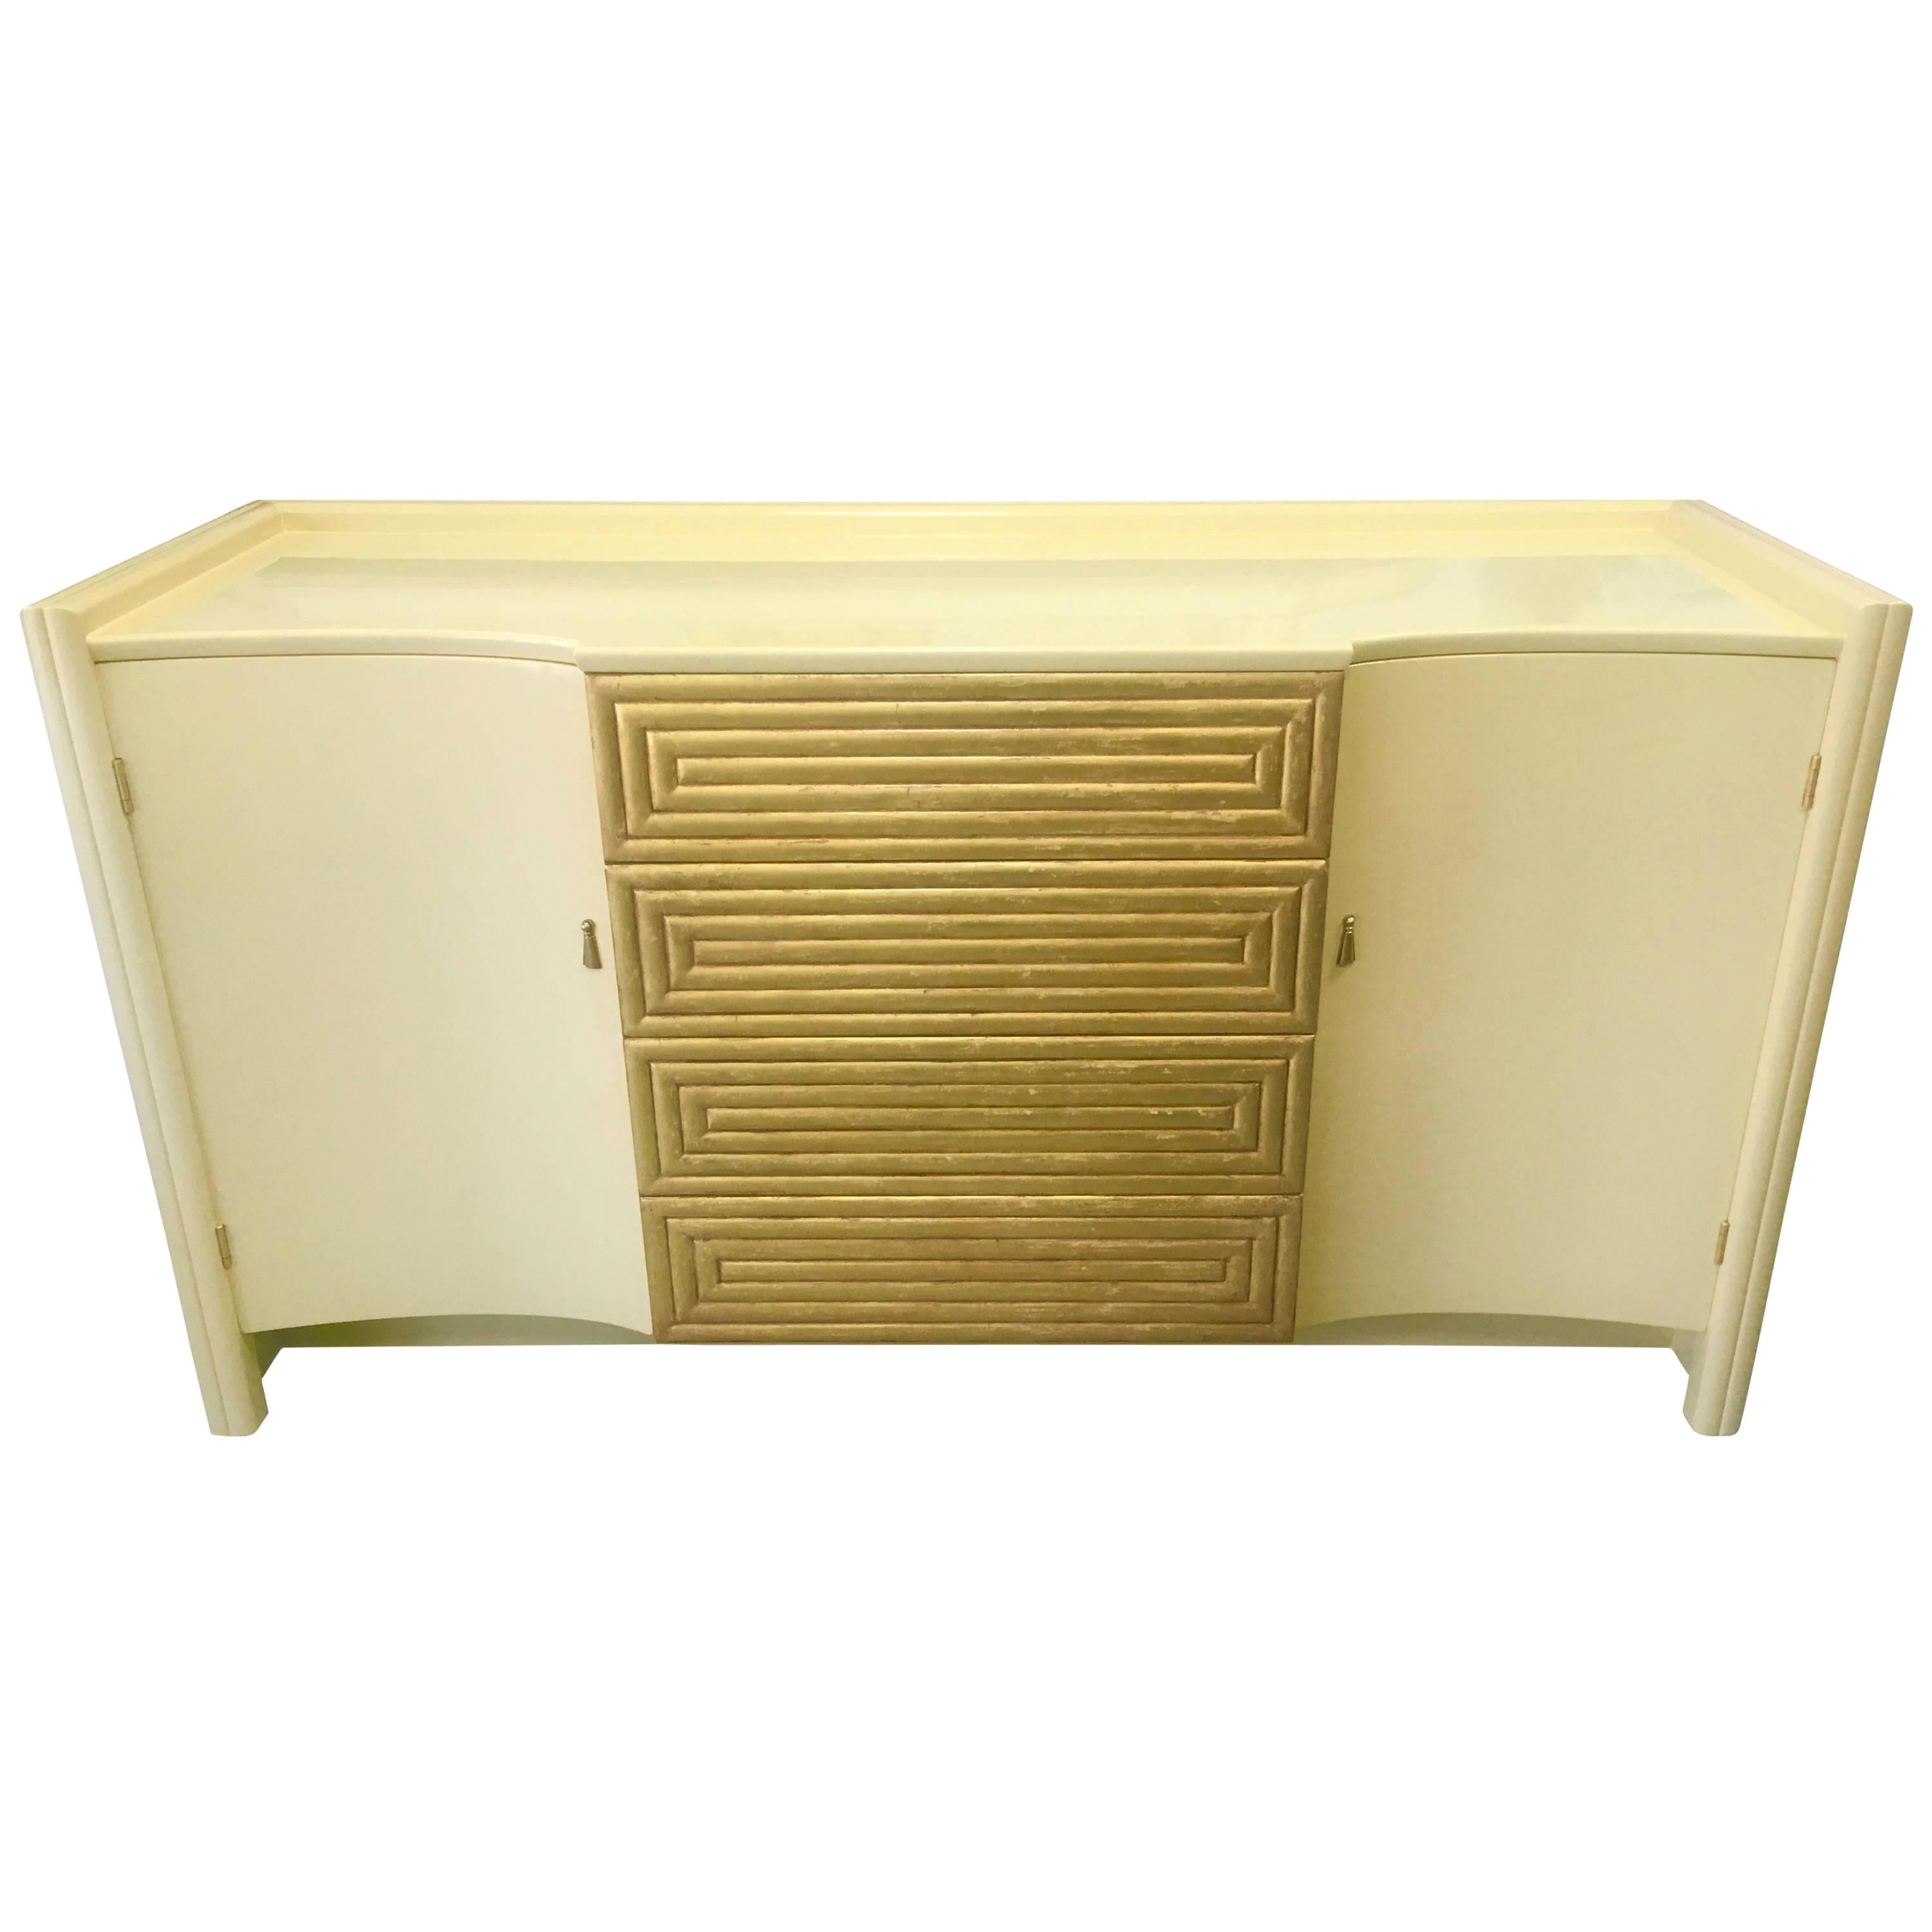 Very Rare Cream Lacquer Buffet by Johann Tapp for Gumps, circa 1940 For Sale